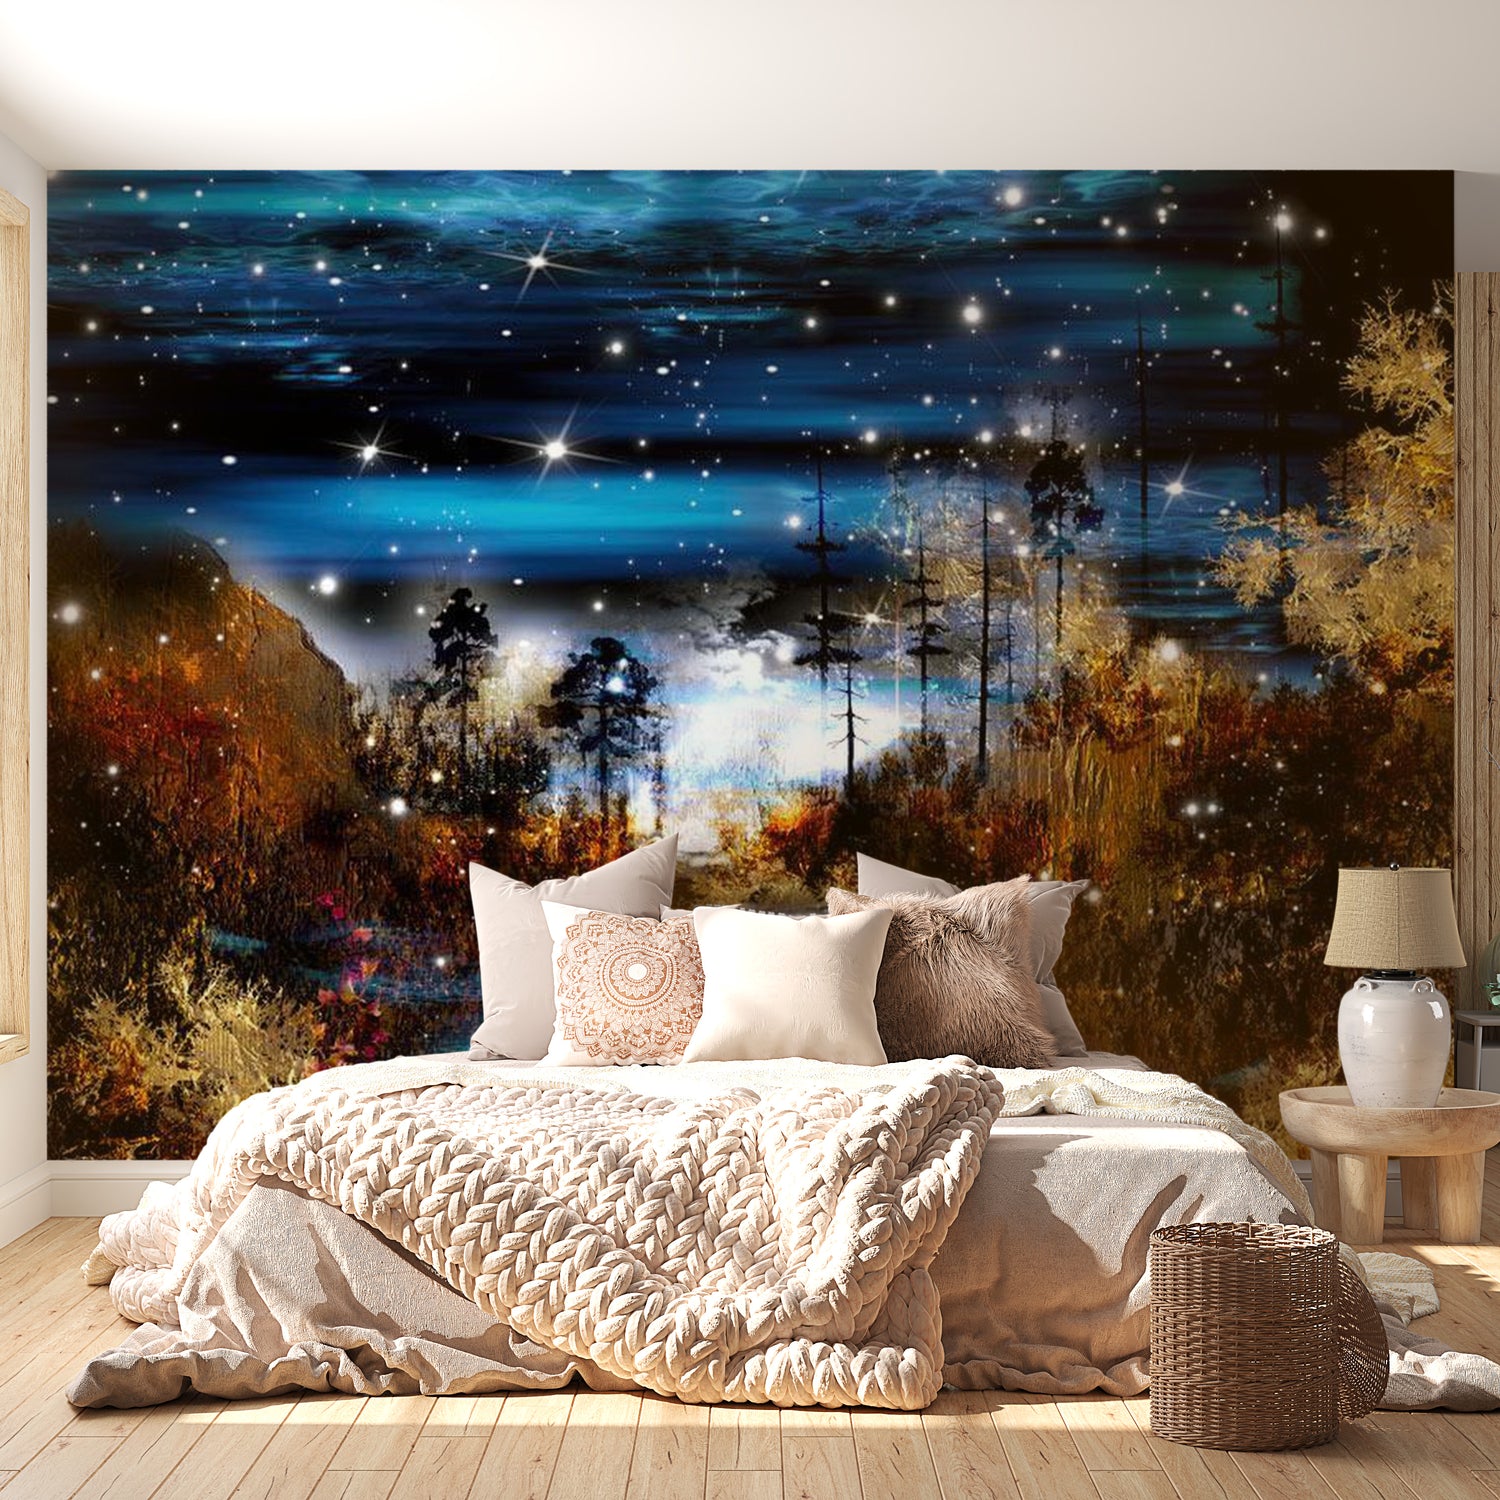 Peel & Stick Cartoon Wall Mural - Magical Forest - Removable Wall Decals